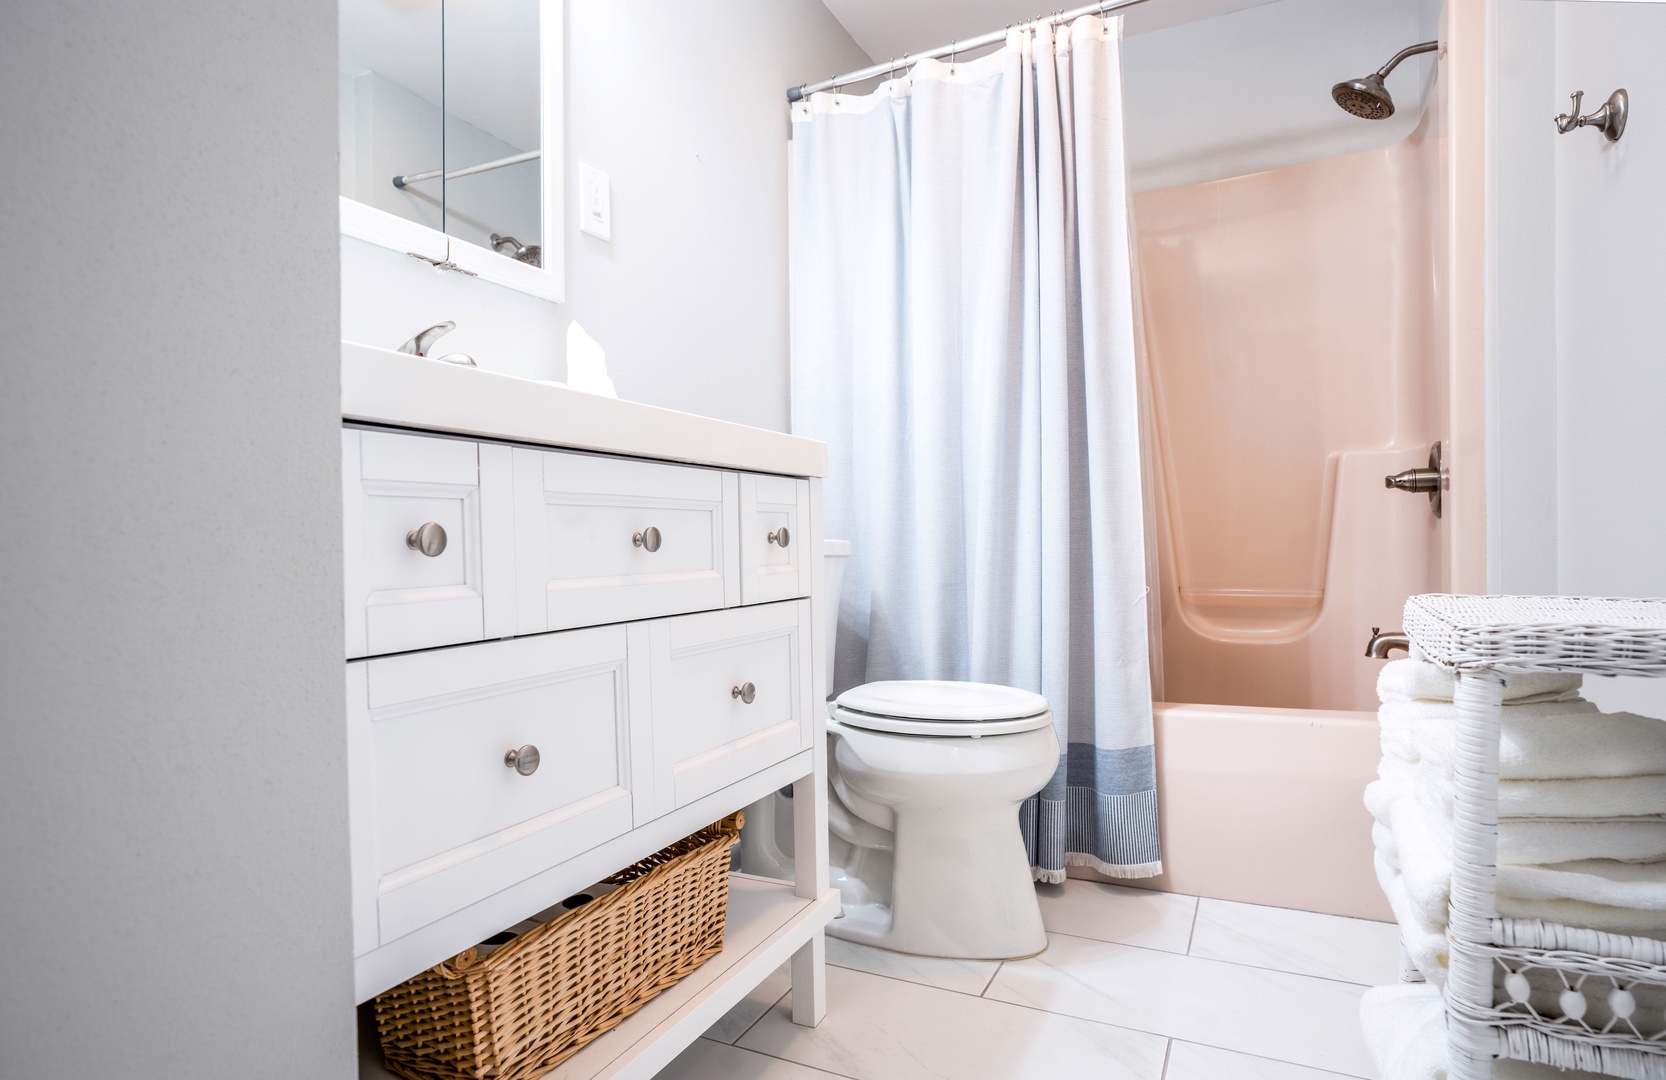 The shared full bath on the 1st floor includes a single vanity & shower/tub combo